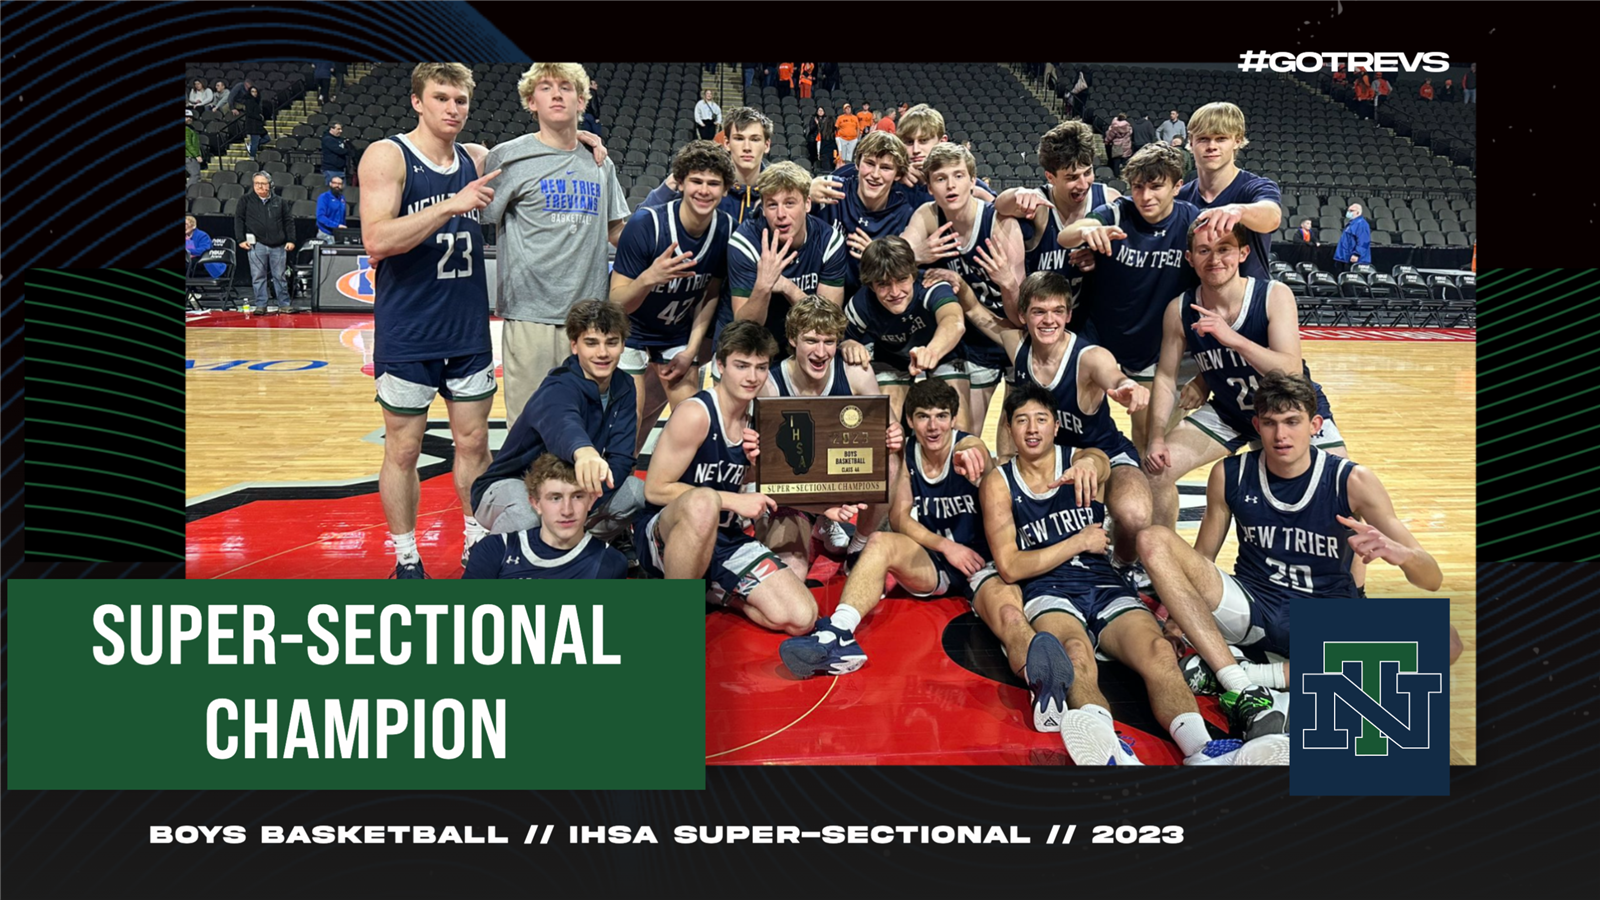 Super-Sectional Champions 2023